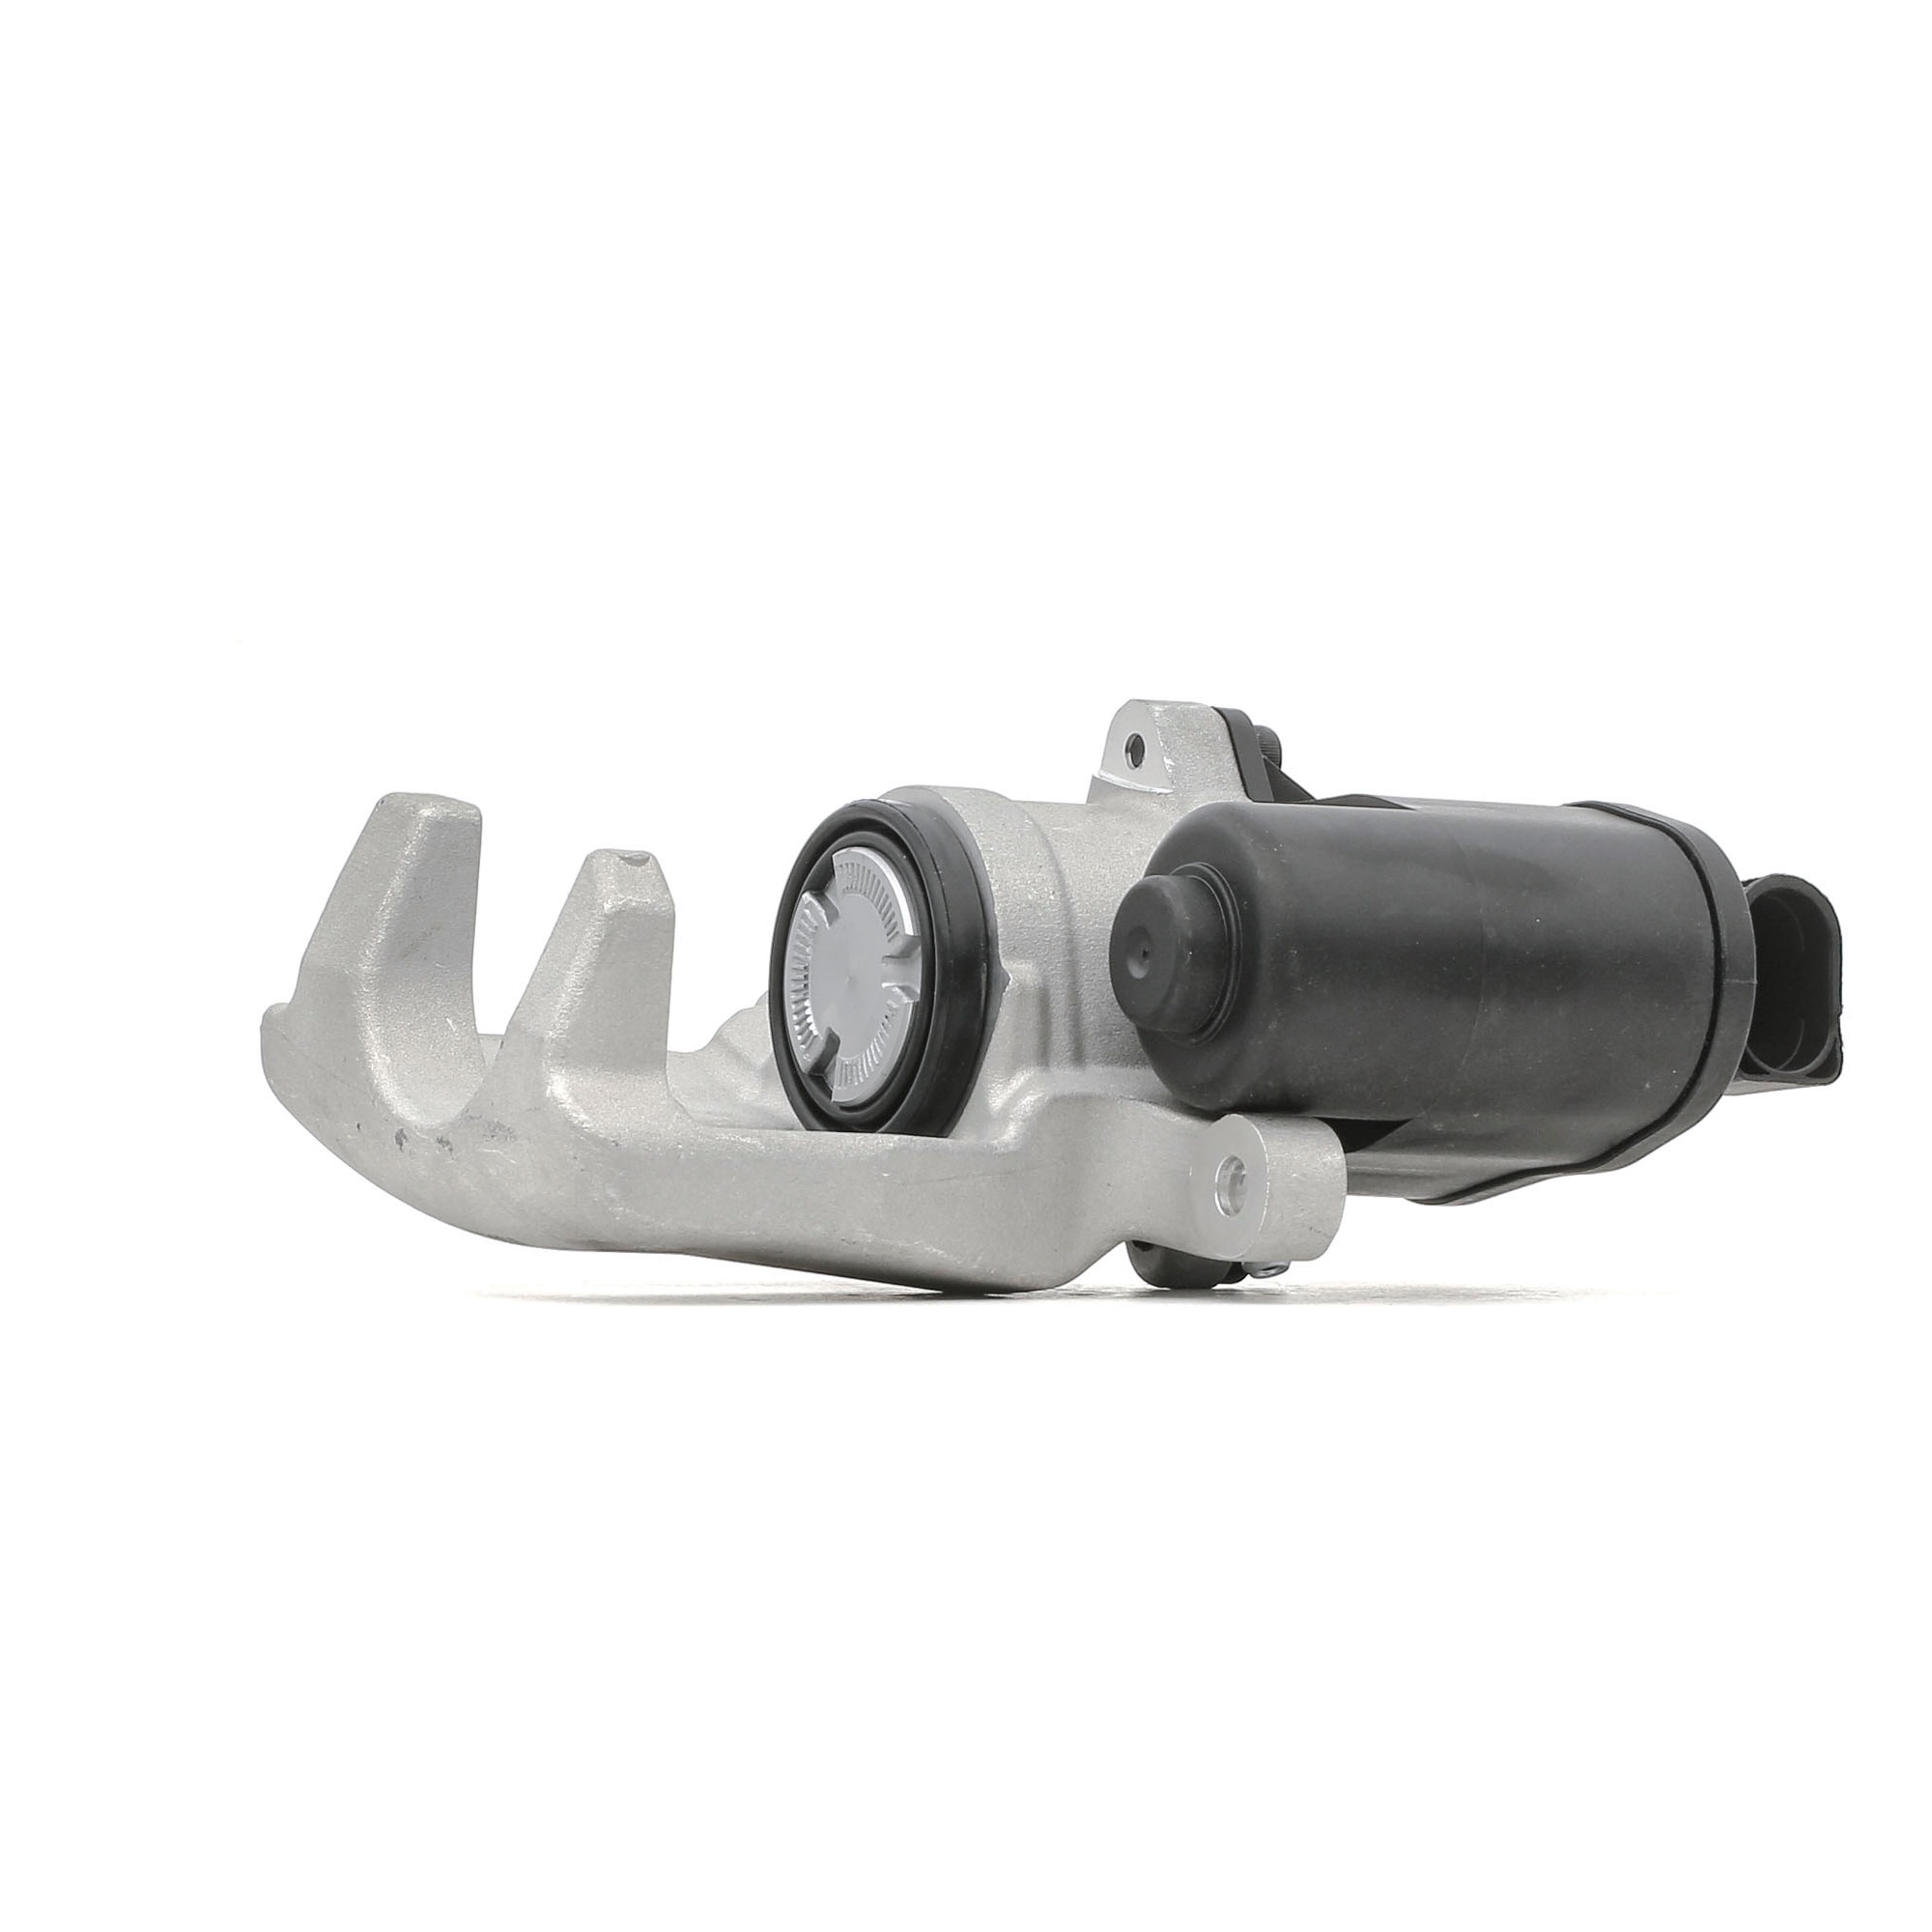 SKBC-0460831 STARK Brake calipers VOLVO Aluminium, Rear Axle Left, for vehicles with electric parking brake